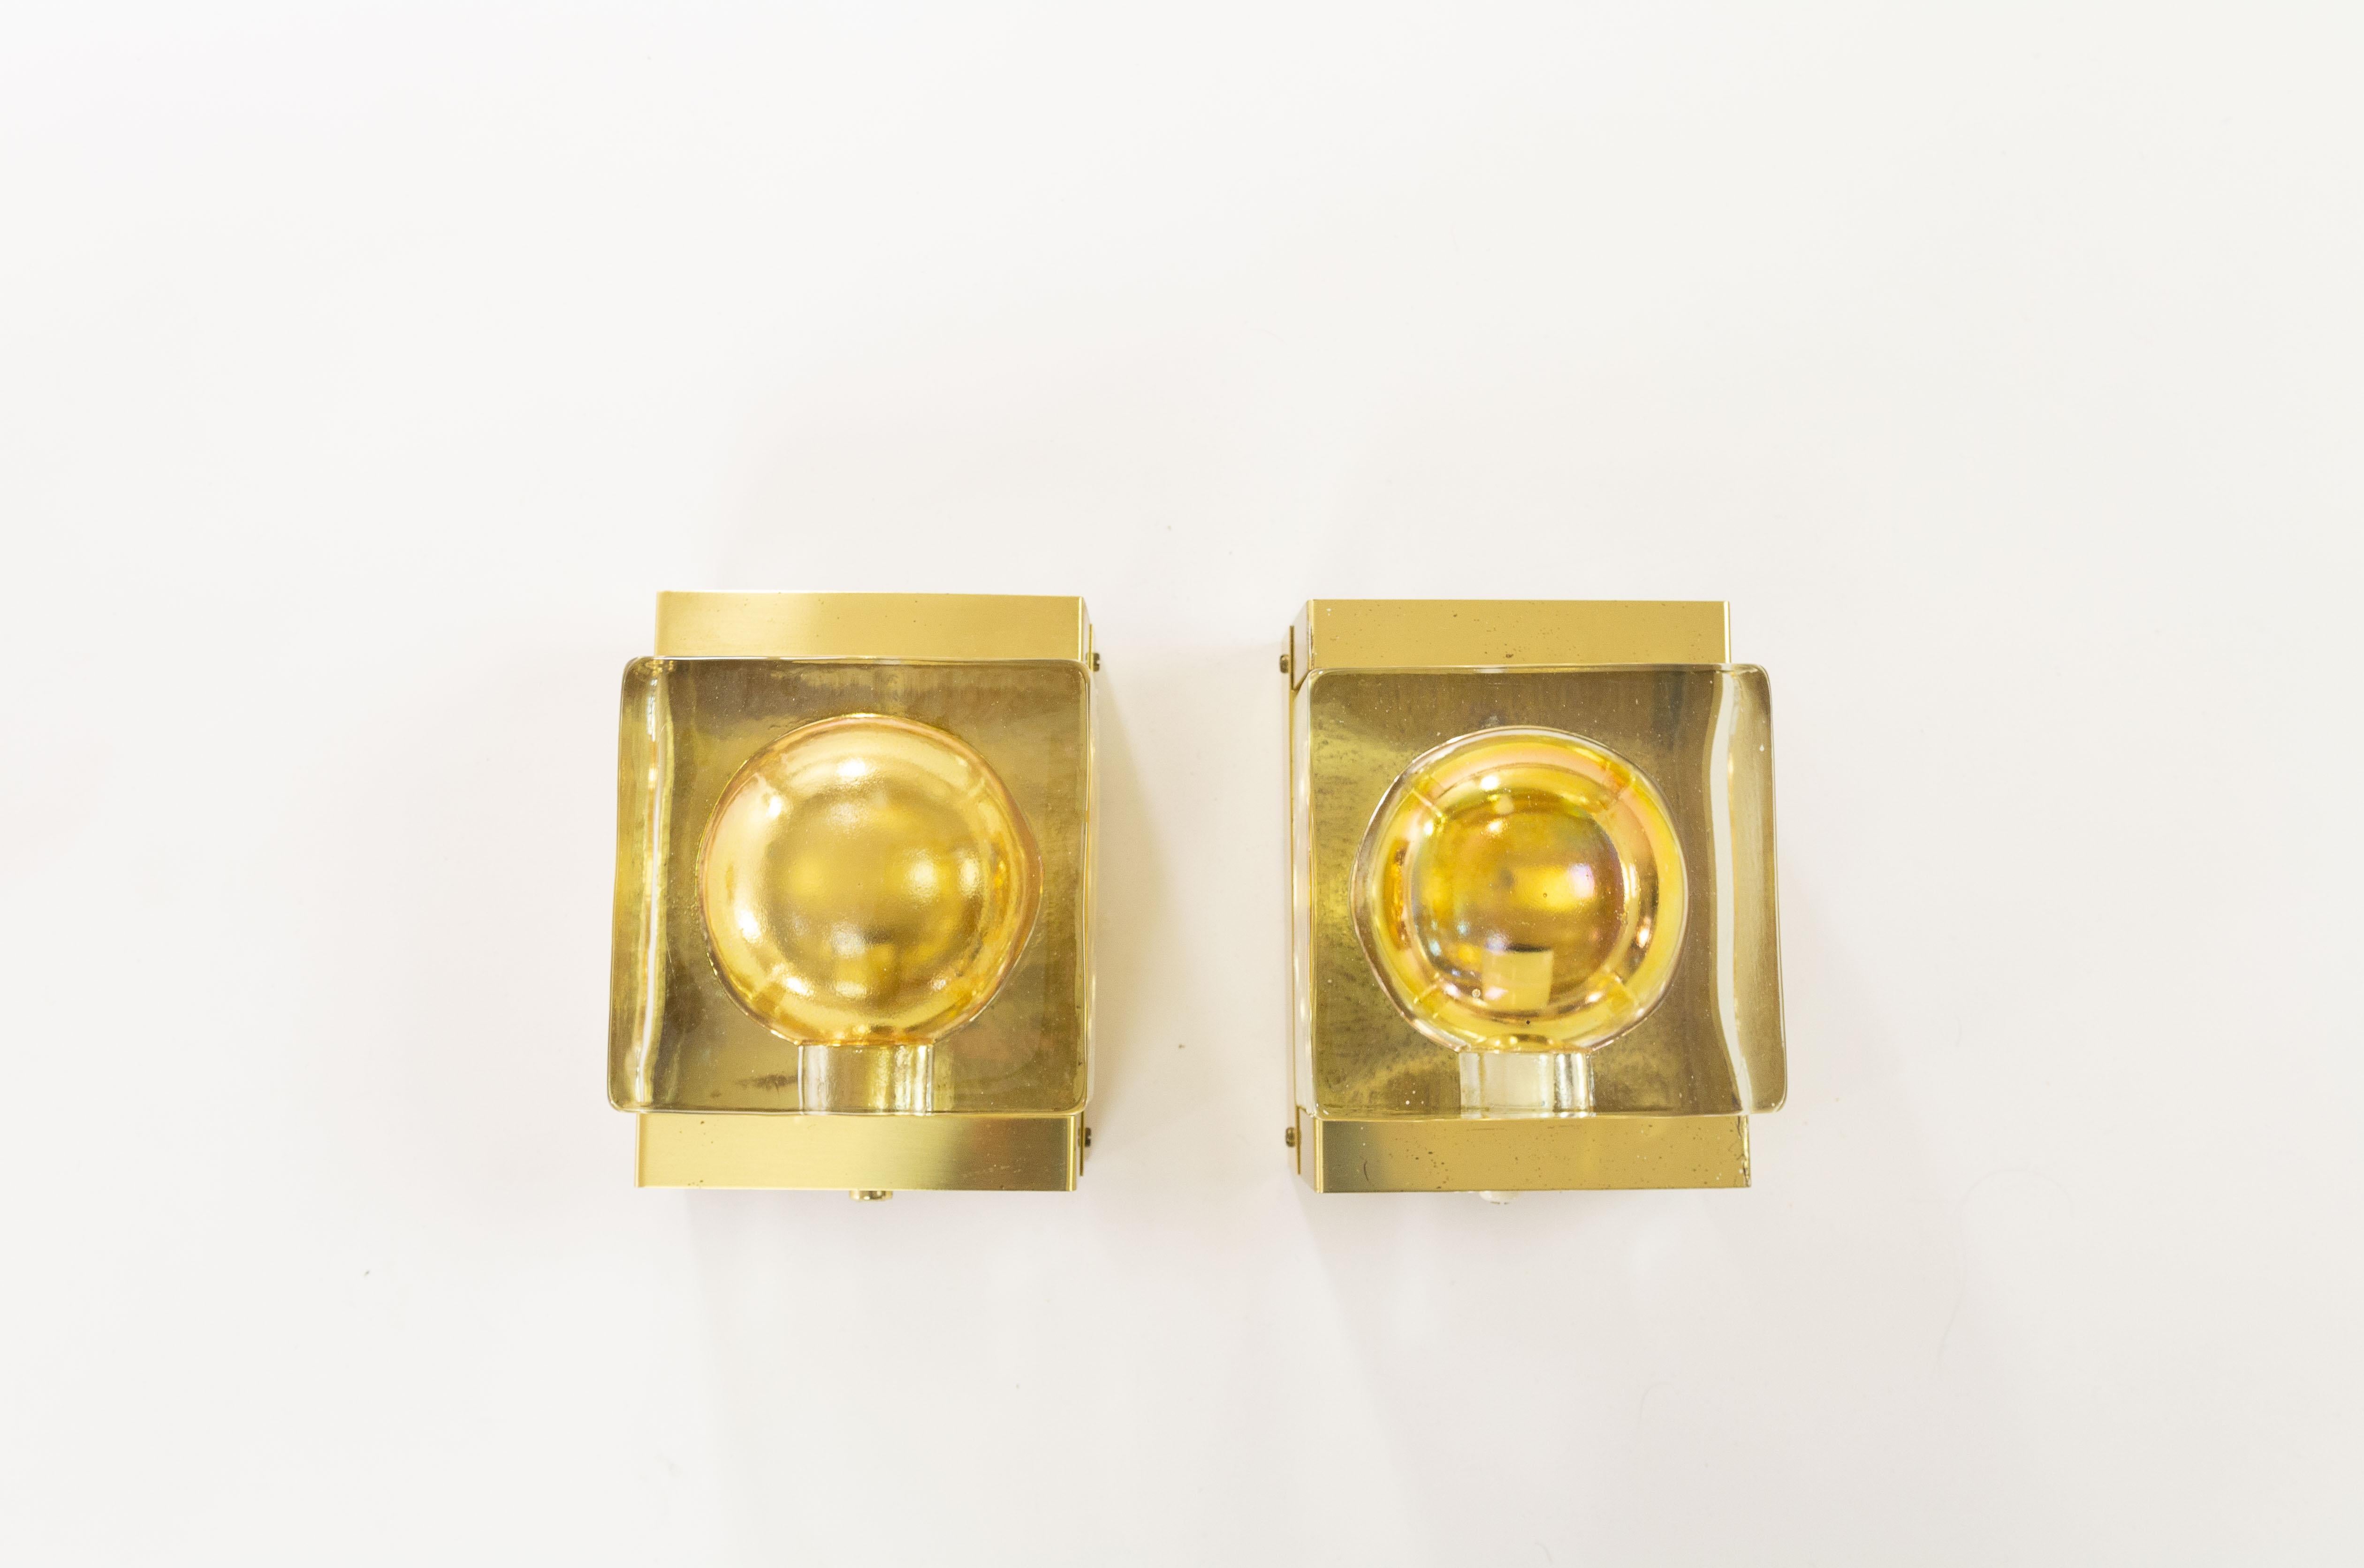 A set of two rare gold Maritim Lampet wall lamps, produced by Danish lighting manufacturer Vitrika in the 1970s.

Both lamps consist of two parts: a solid and so rather heavy handmade glass body (2.4 kg / 5.3 lbs) and the brass holder.

Price is